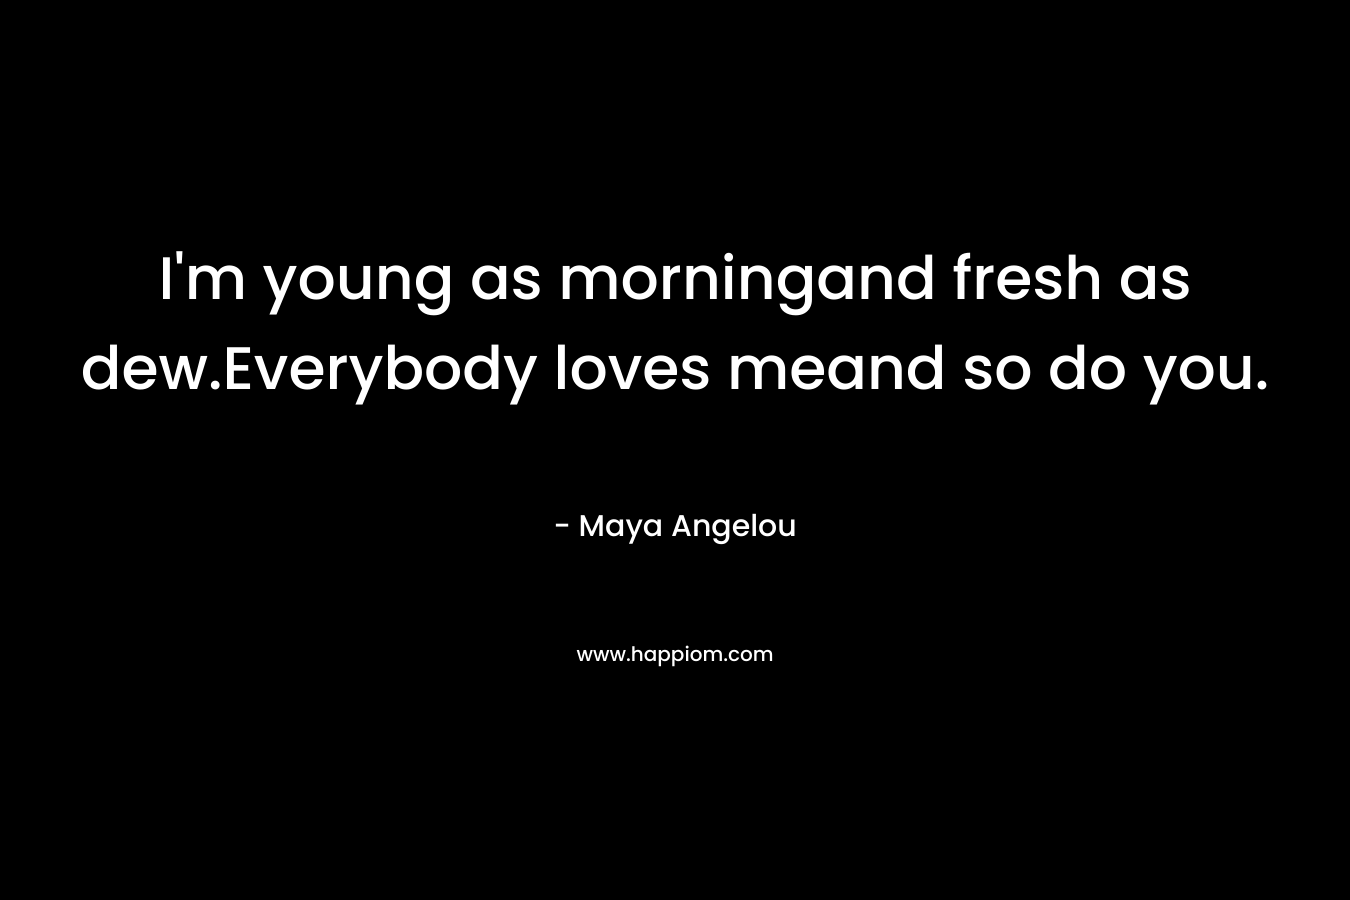 I'm young as morningand fresh as dew.Everybody loves meand so do you.